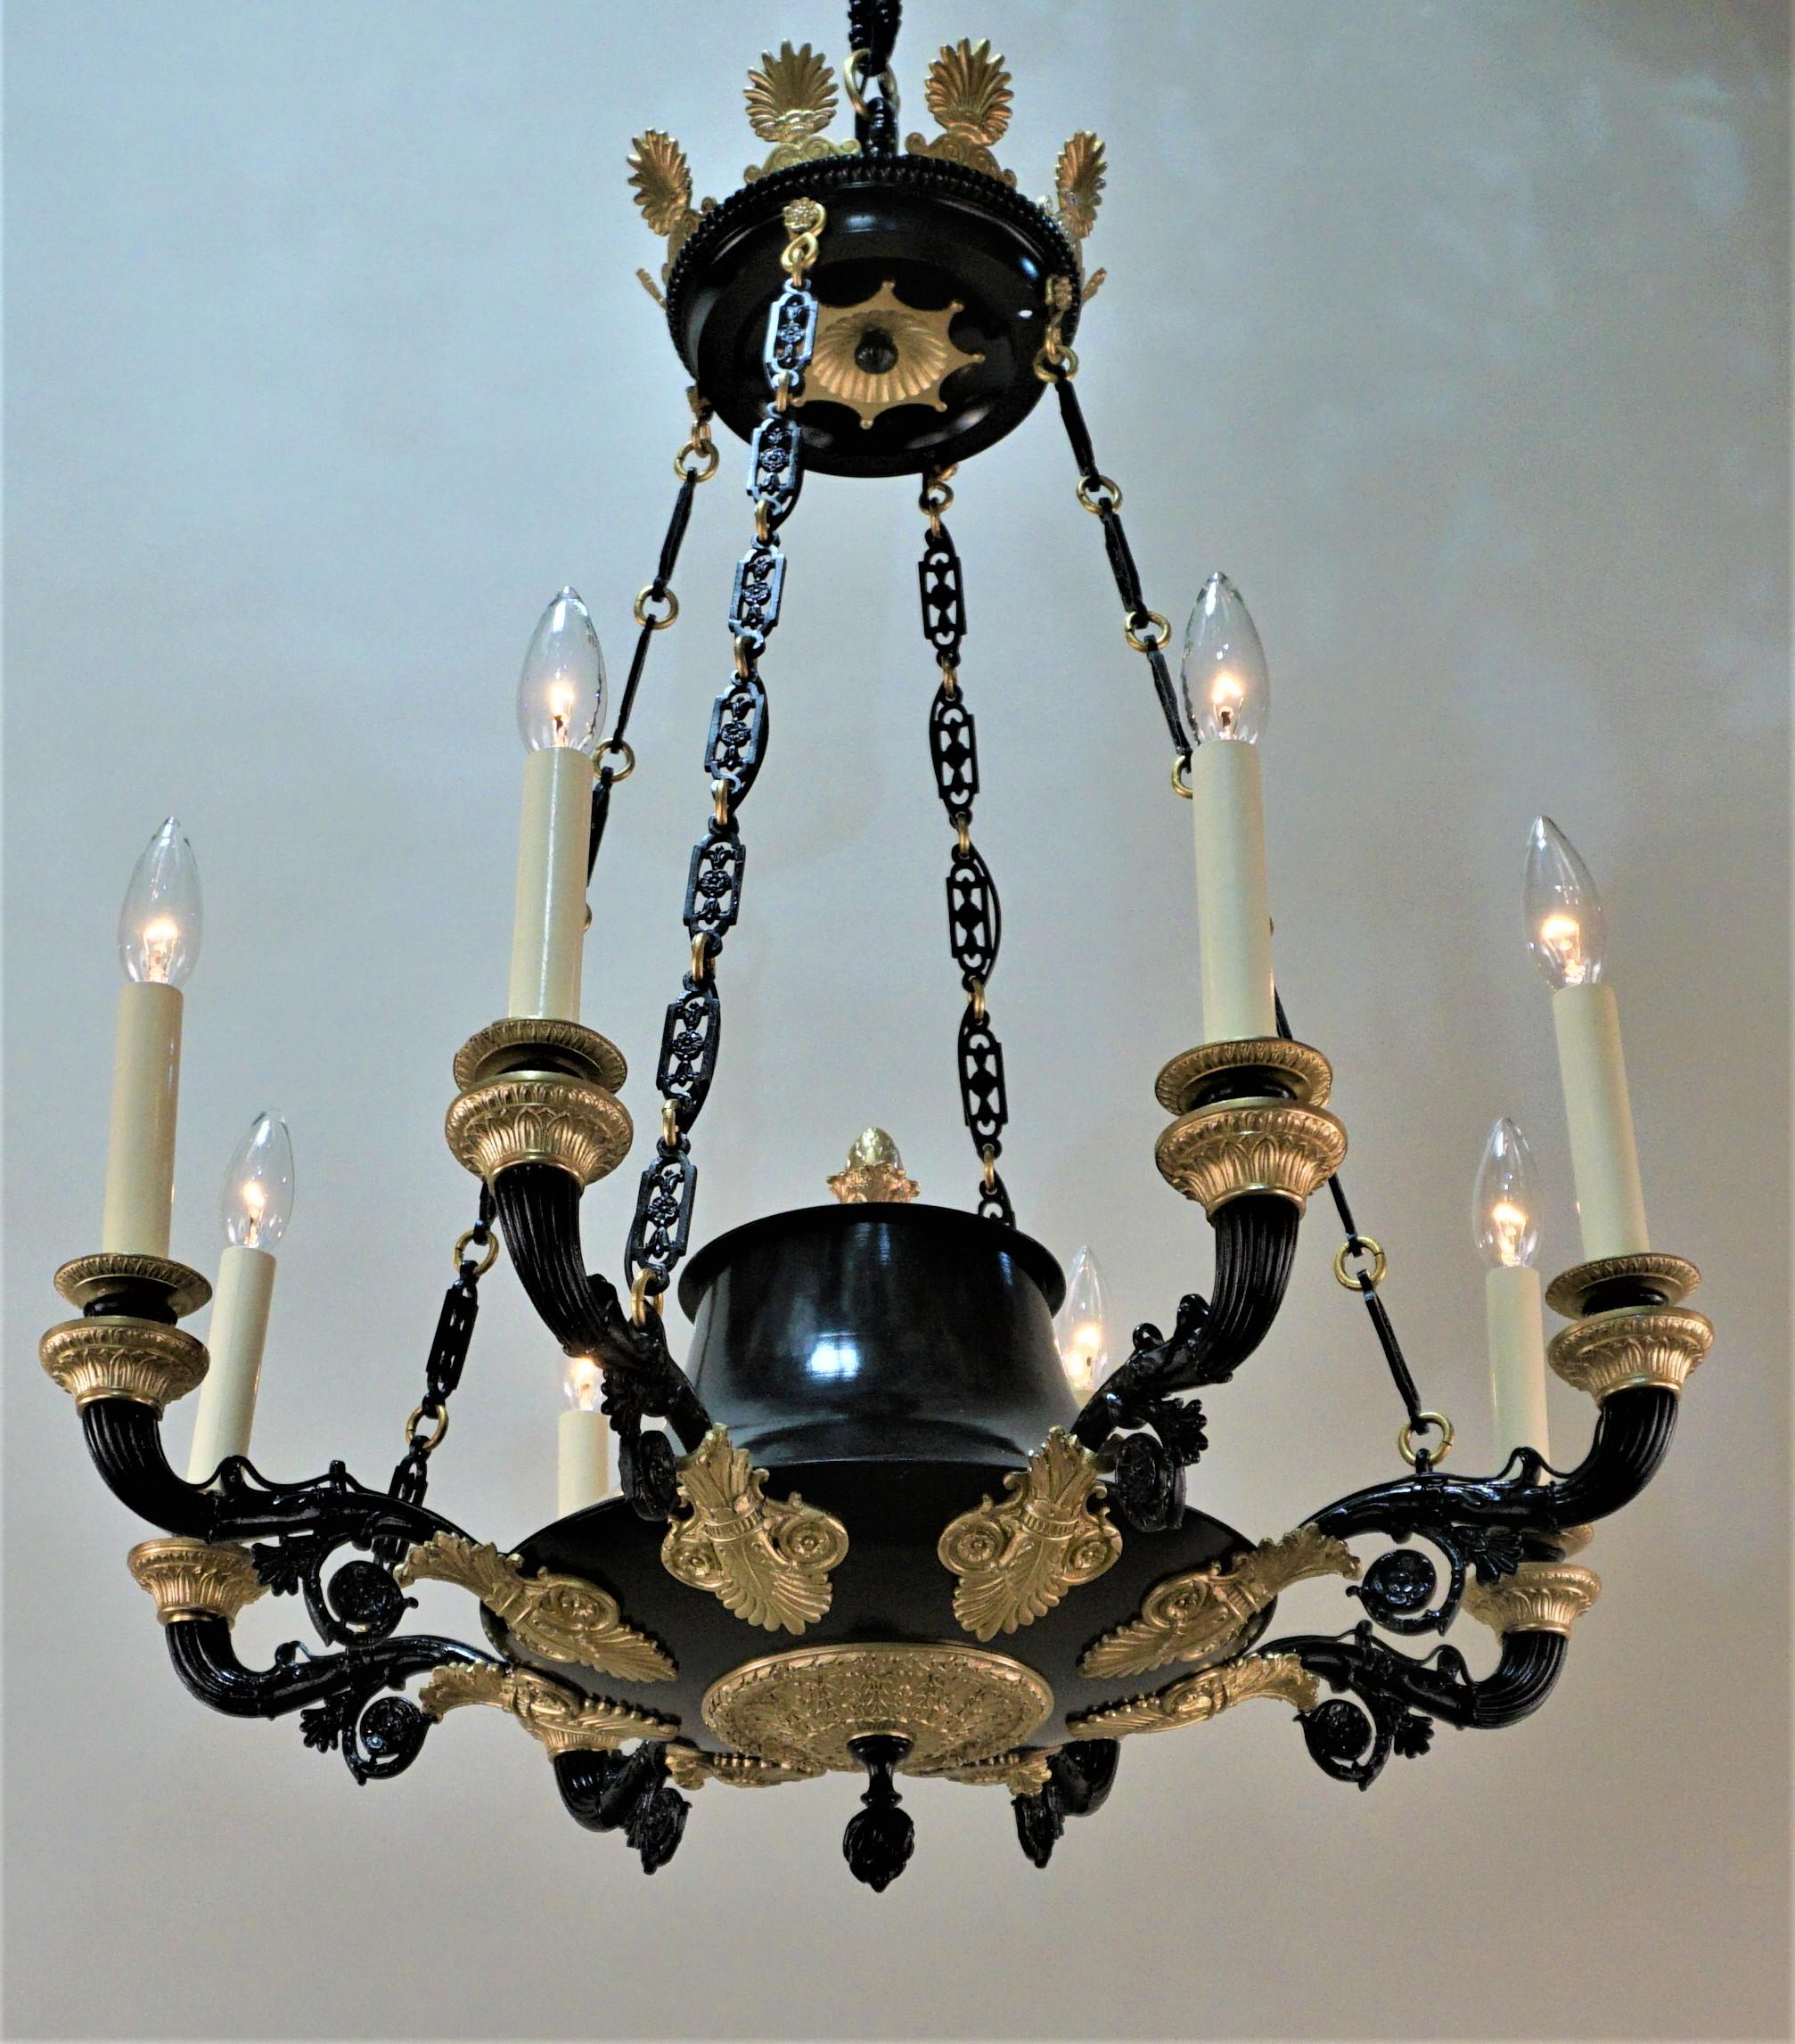 French, 19th century eight-light two color bronze empire style French chandelier.
Measures: Total height of this chandelier is 46.5